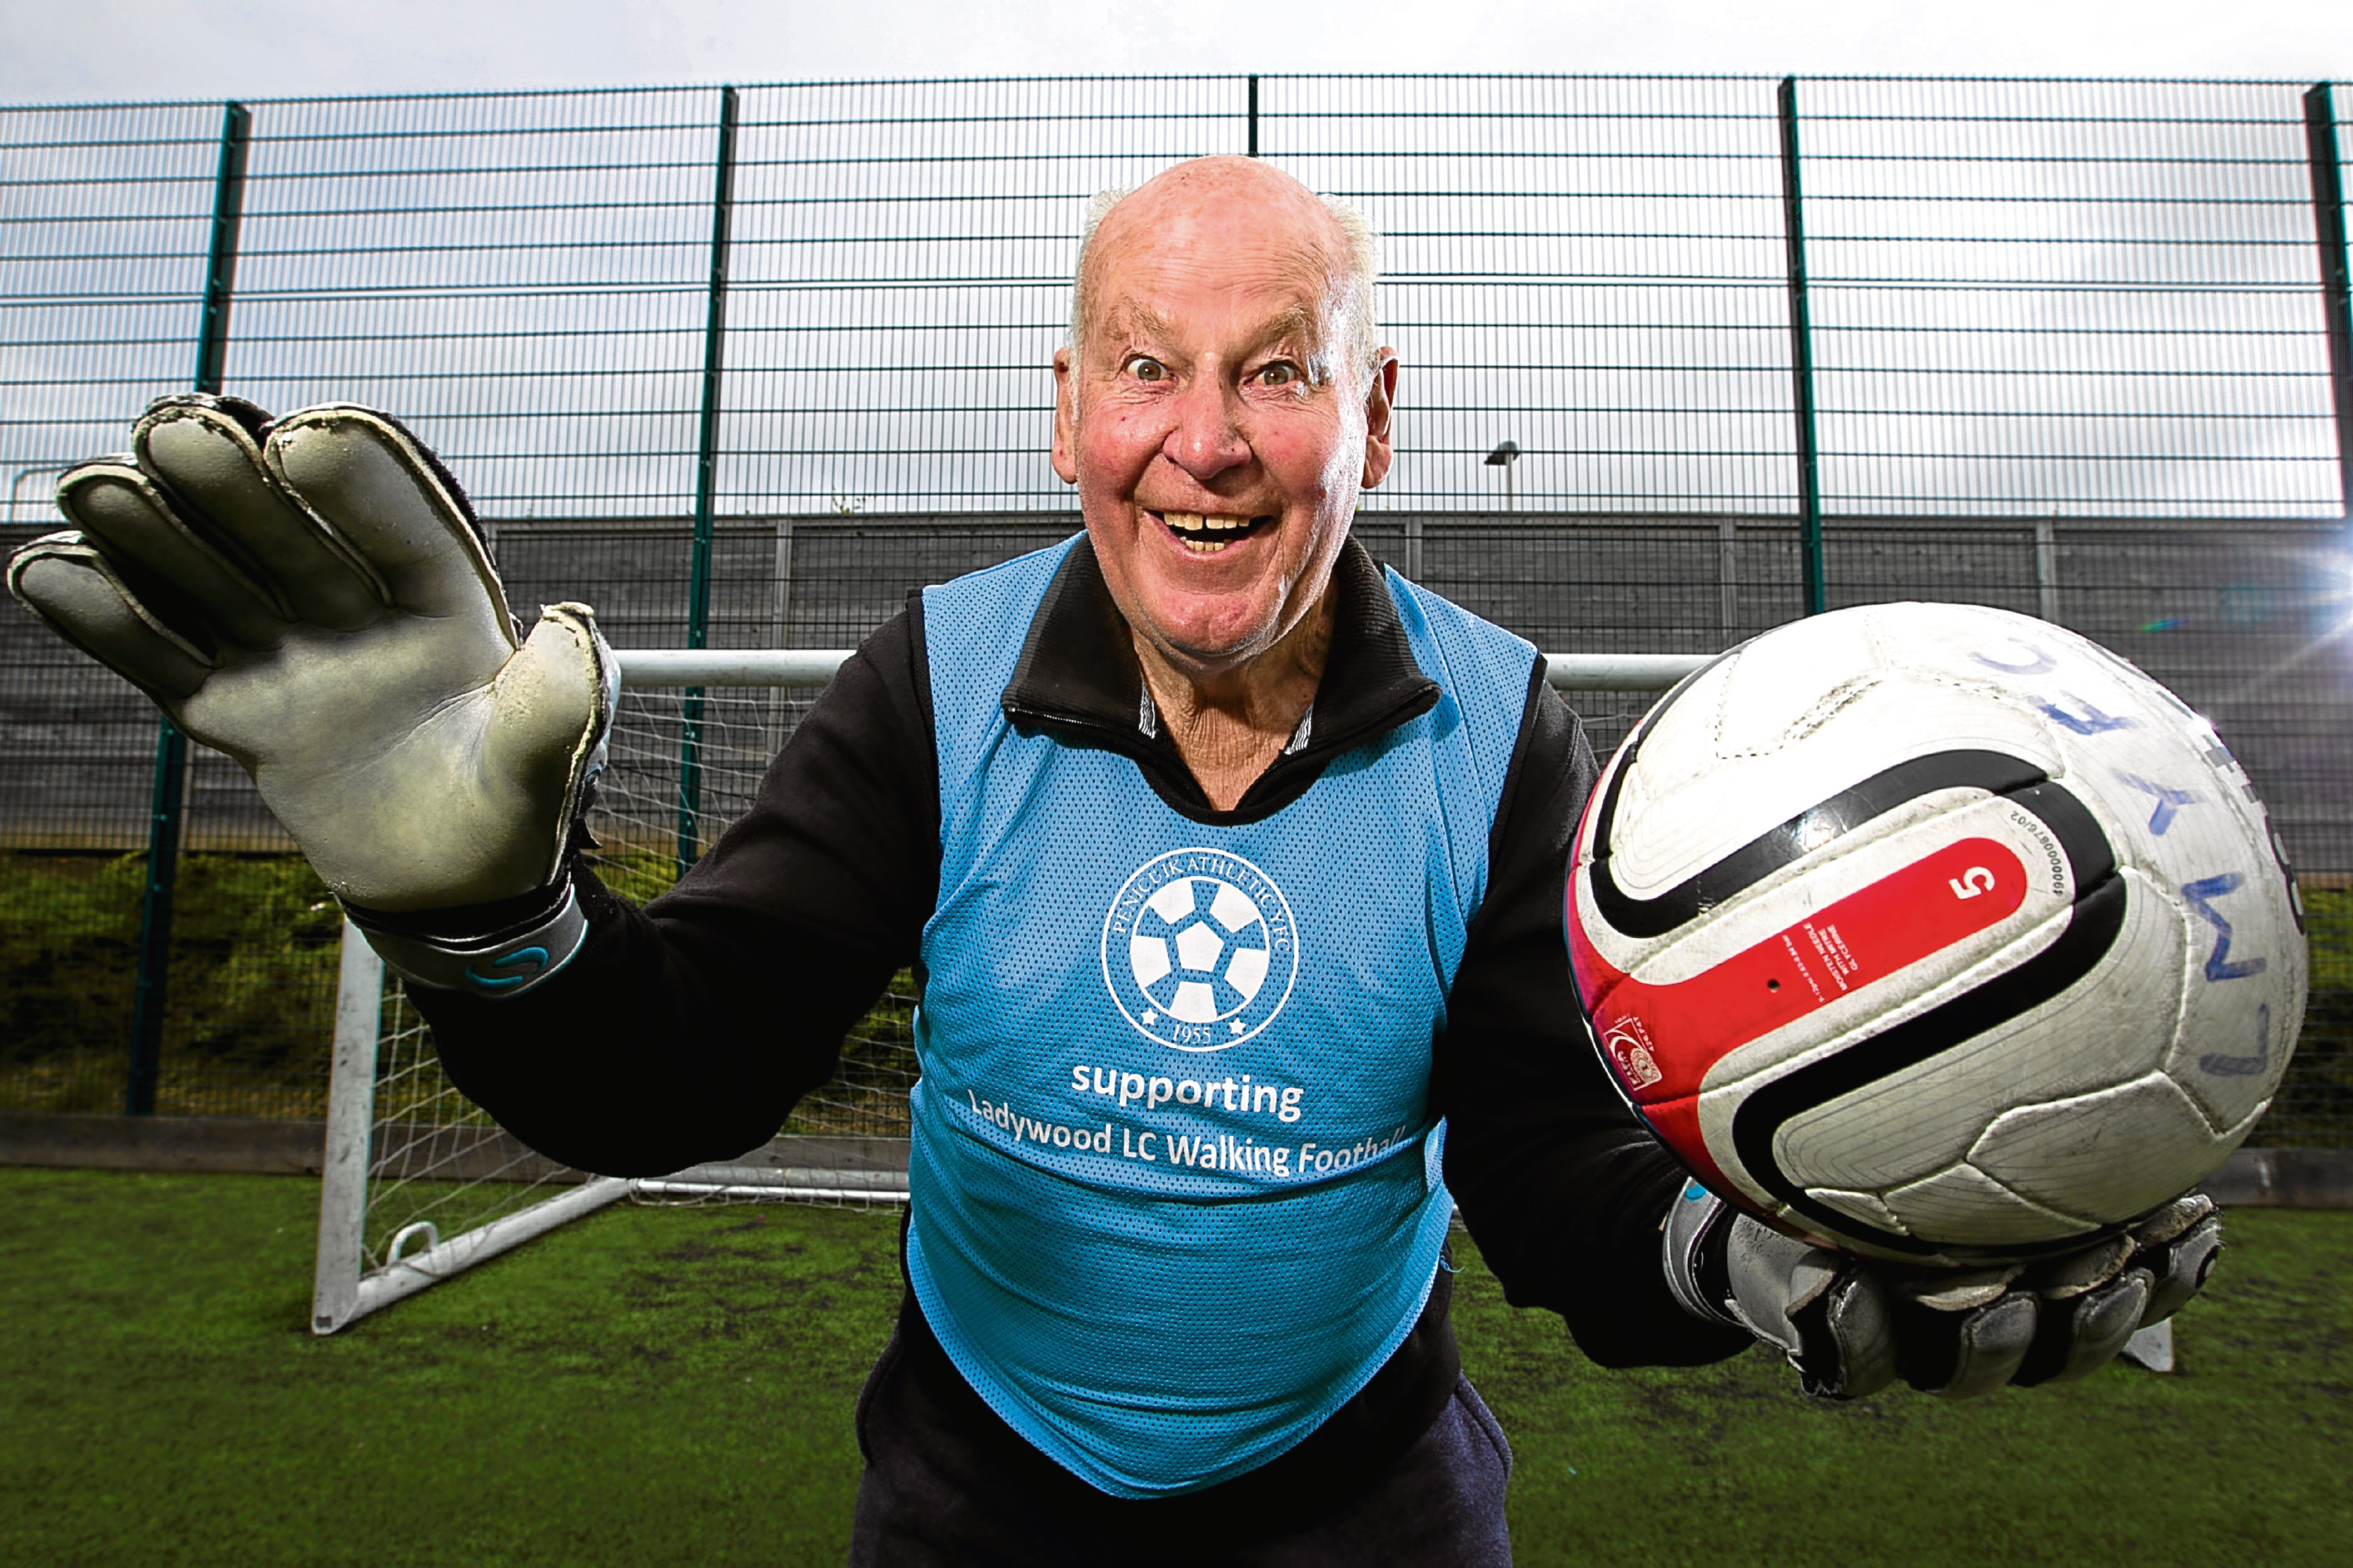 Peter Collins, 85 year old goal keeper who play walking football every week. He and his team recently won the Scottish Walking Football Championships. (Andrew Cawley)